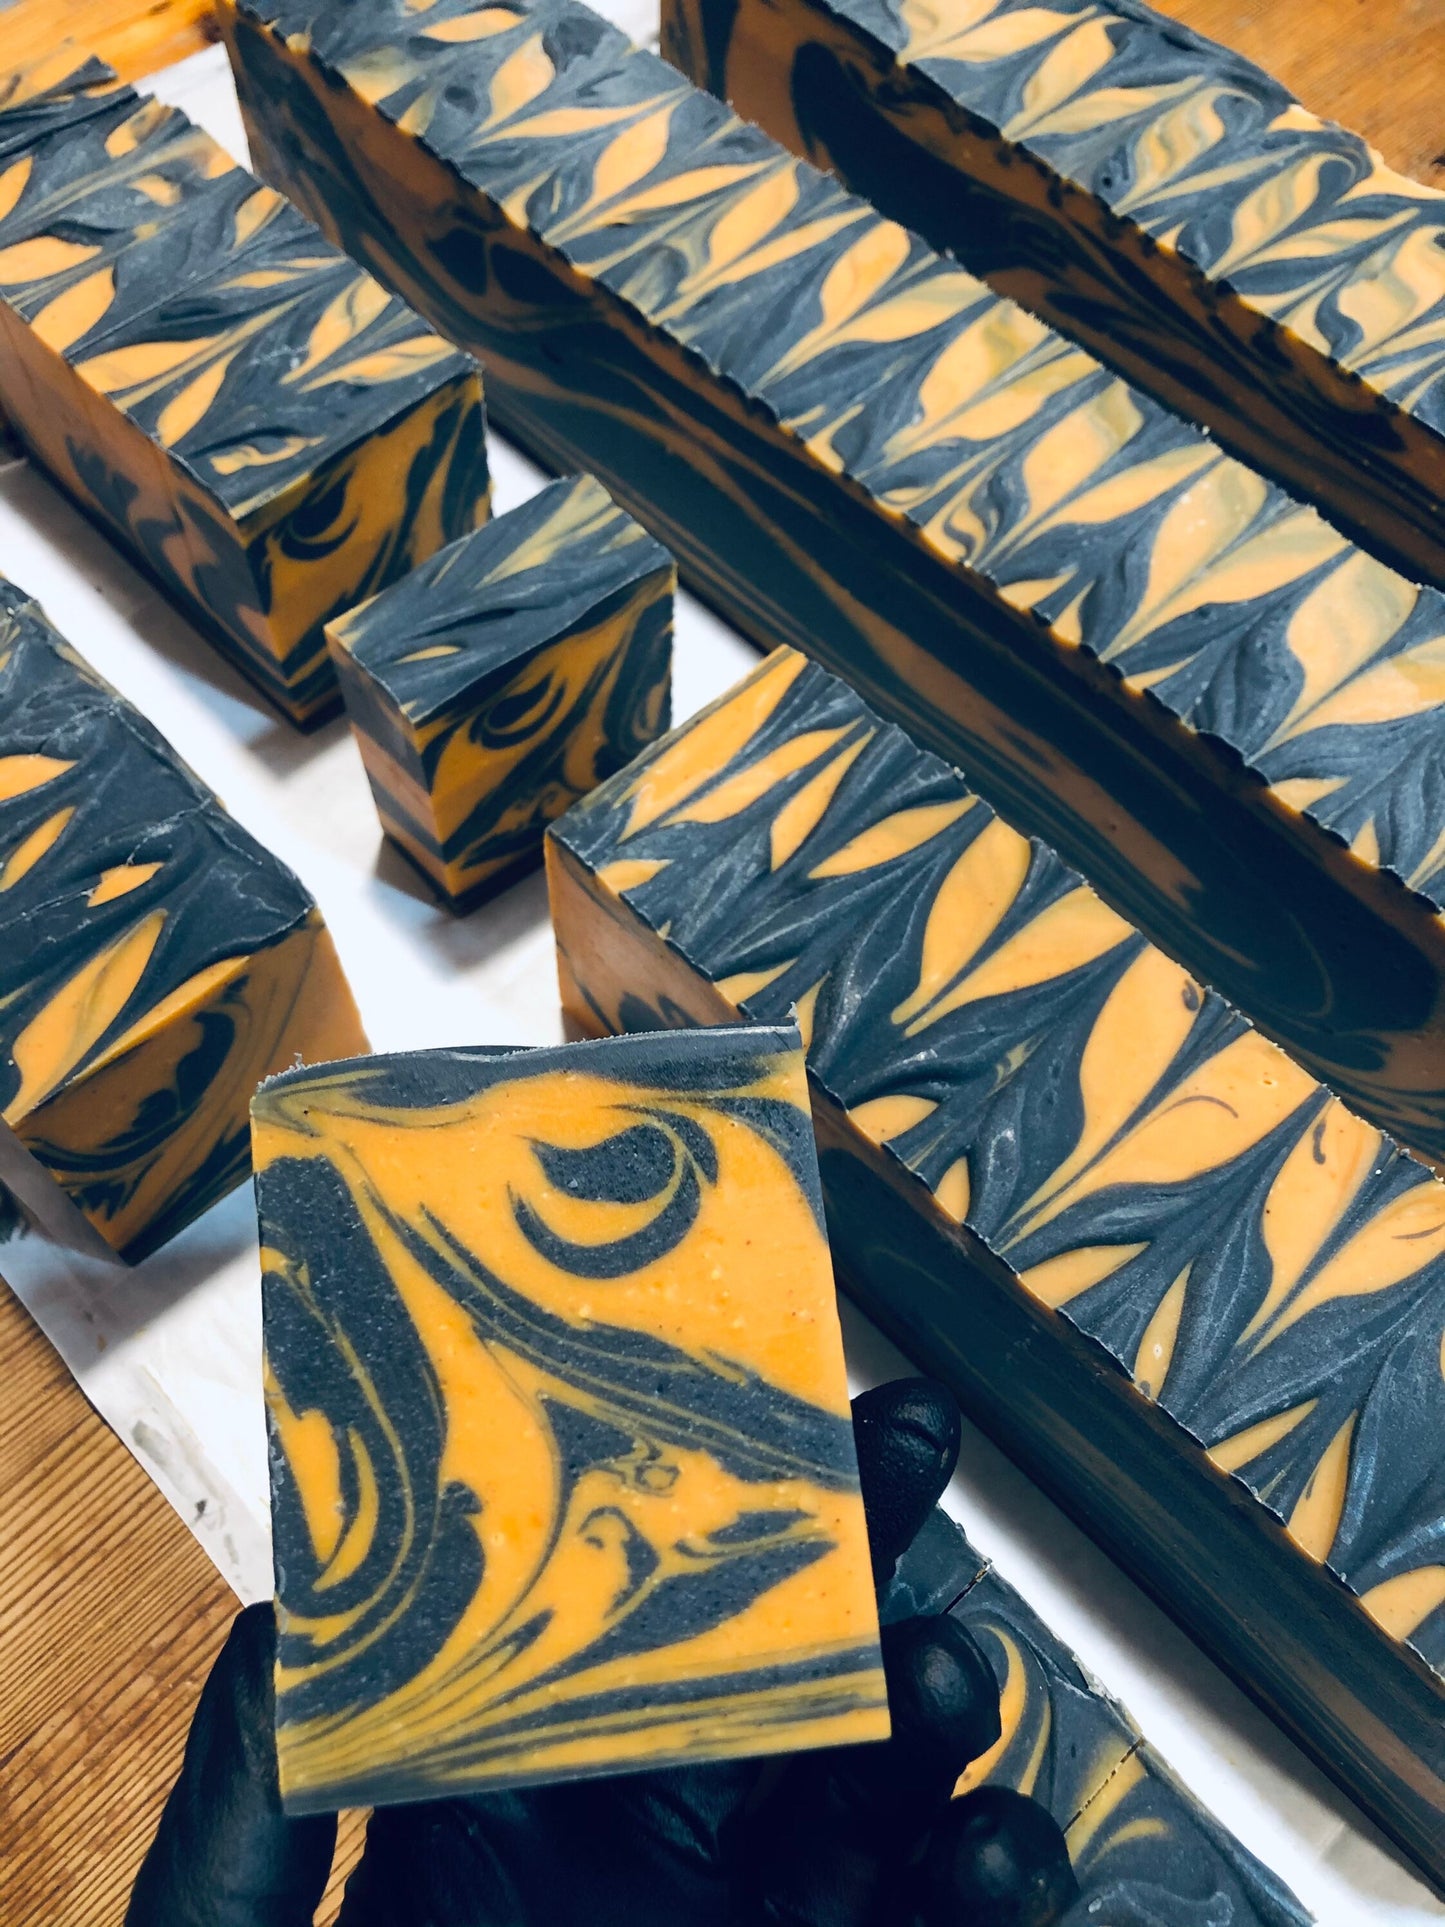 Tiger Tail, Walnut Scrub, fisherman/hunting soap, Vegan, Artisan Shea Butter soap,cold process handcrafted on Vancouver Island,Victoria,B.C.